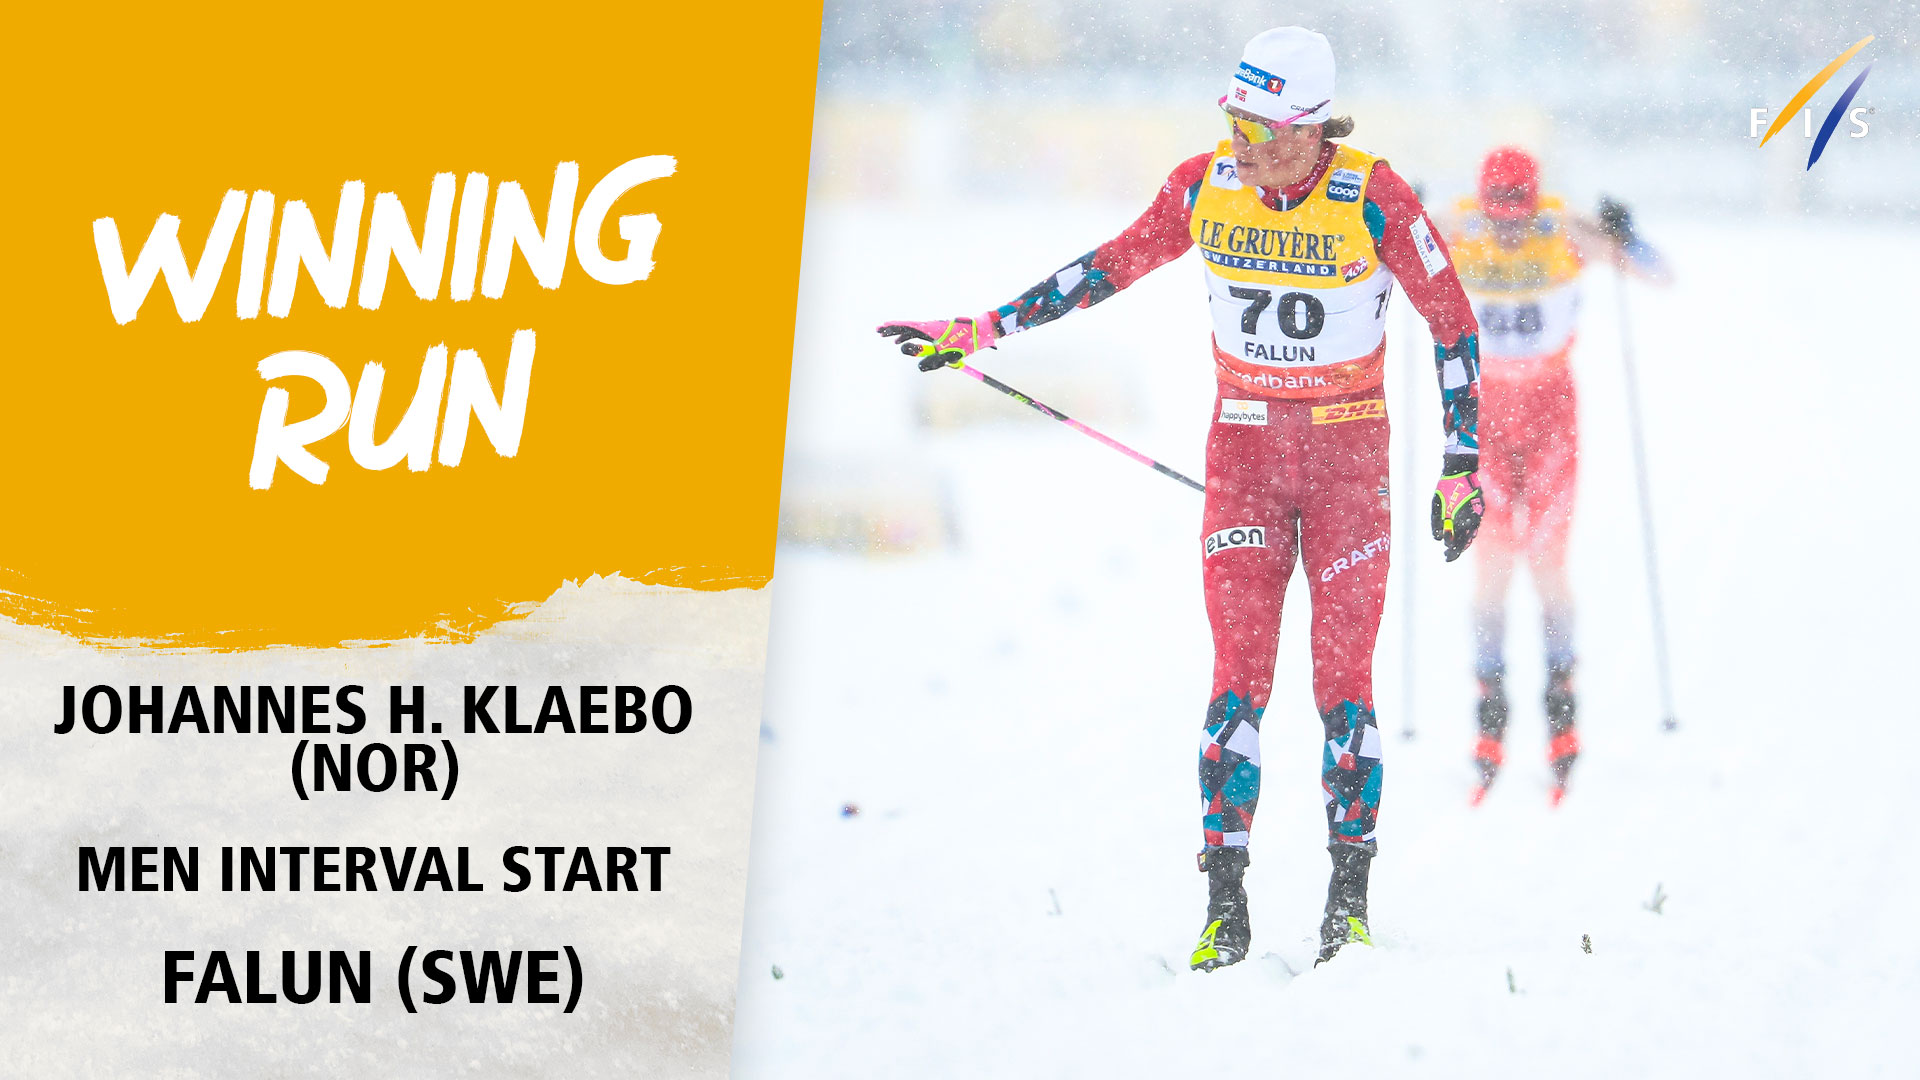 Klaebo put another standout performance in Falun